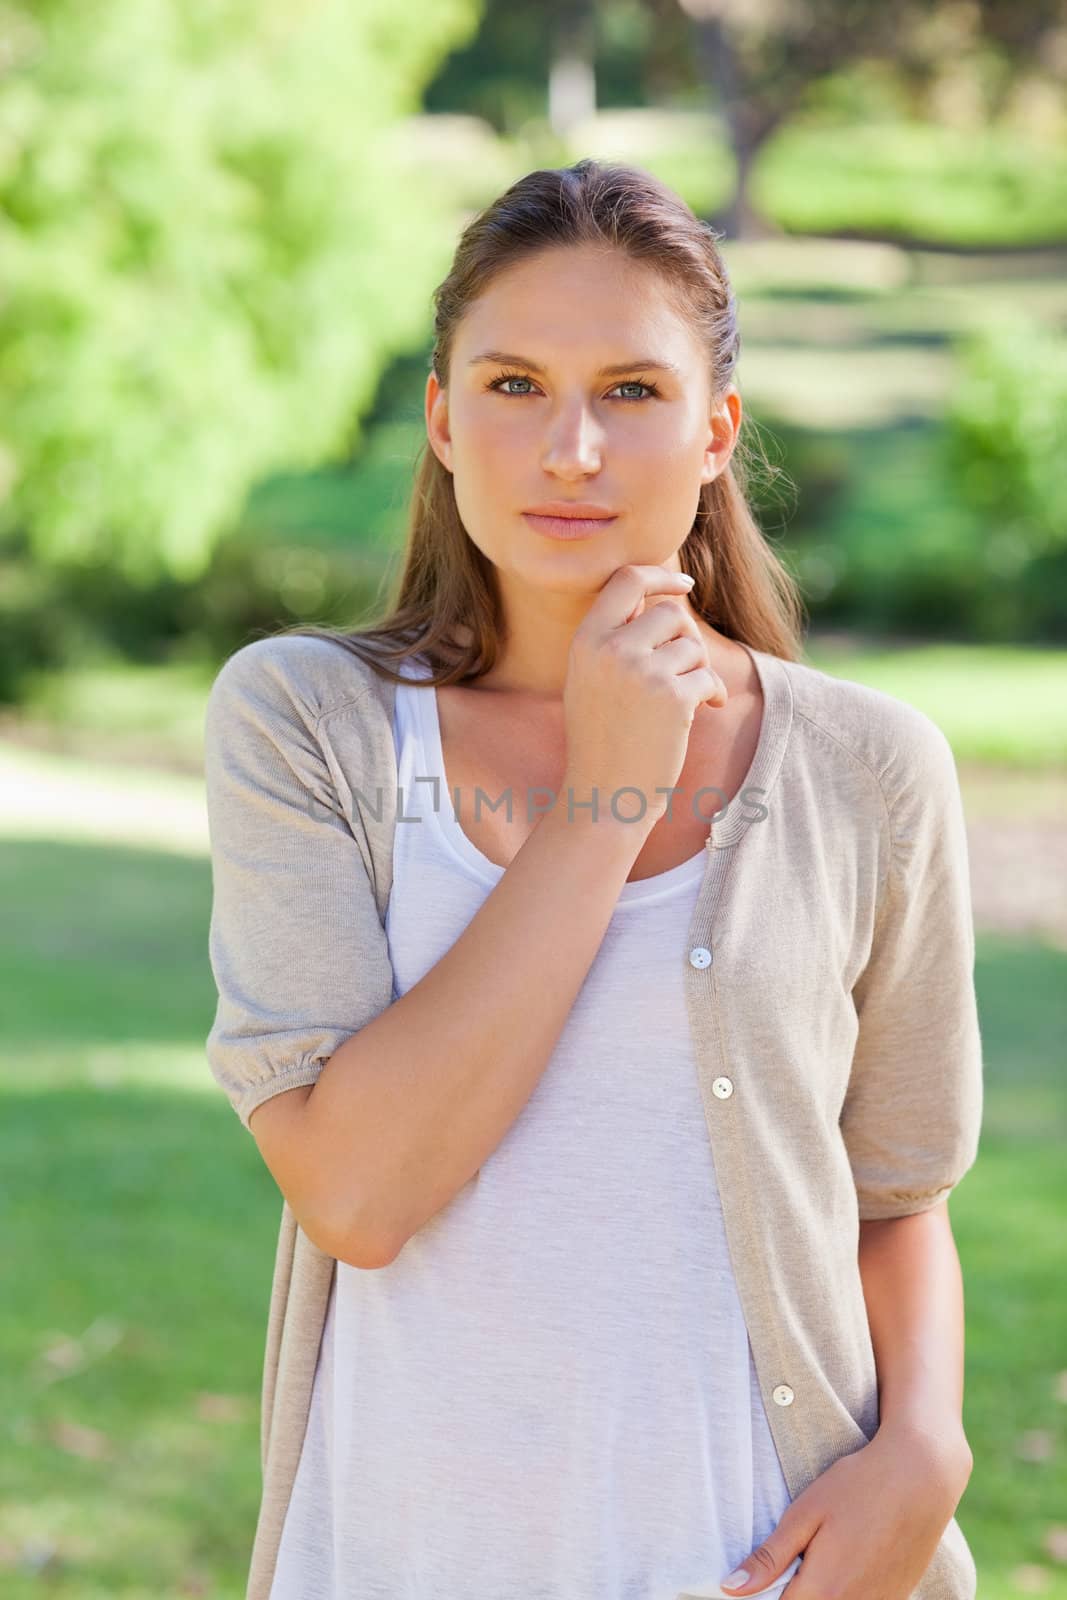 Thoughtful young woman standing in the park